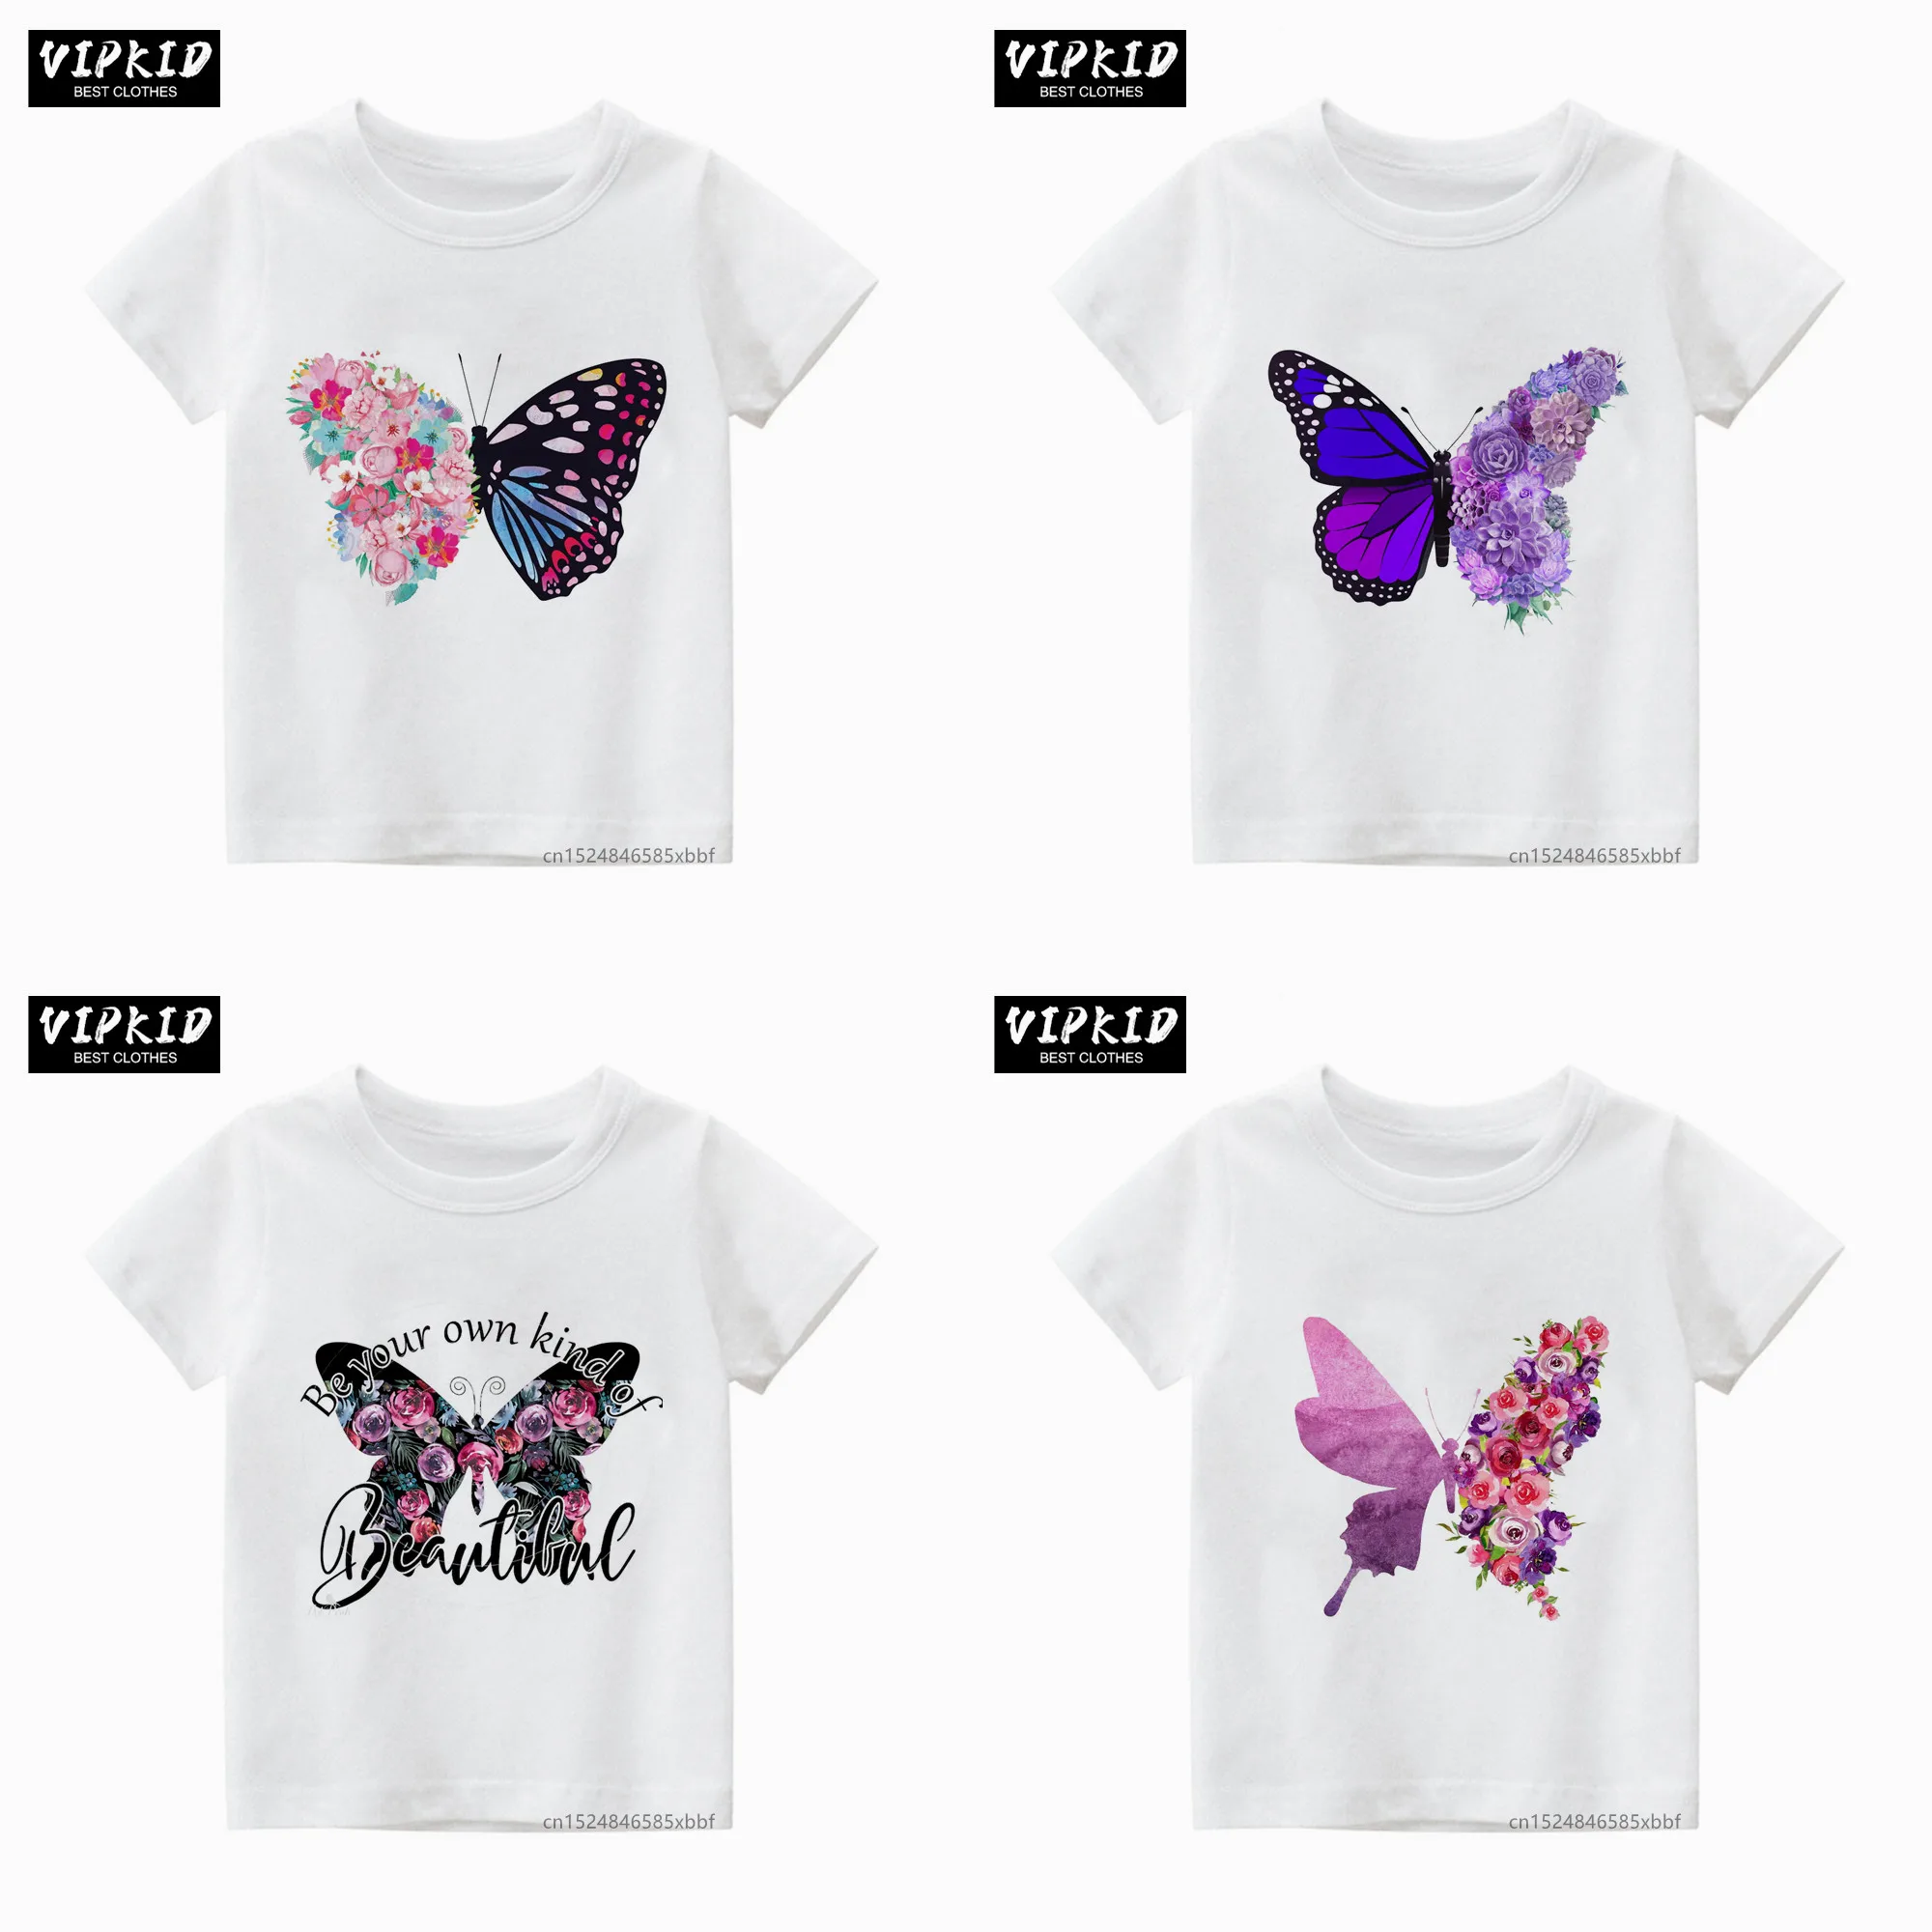 

Floral Watercolor Butterfly Baby Cute Kids Happy Birthday Girl Short Sleeve T-shirt Childrens Gilr Boy Tops Tee,Drop Ship